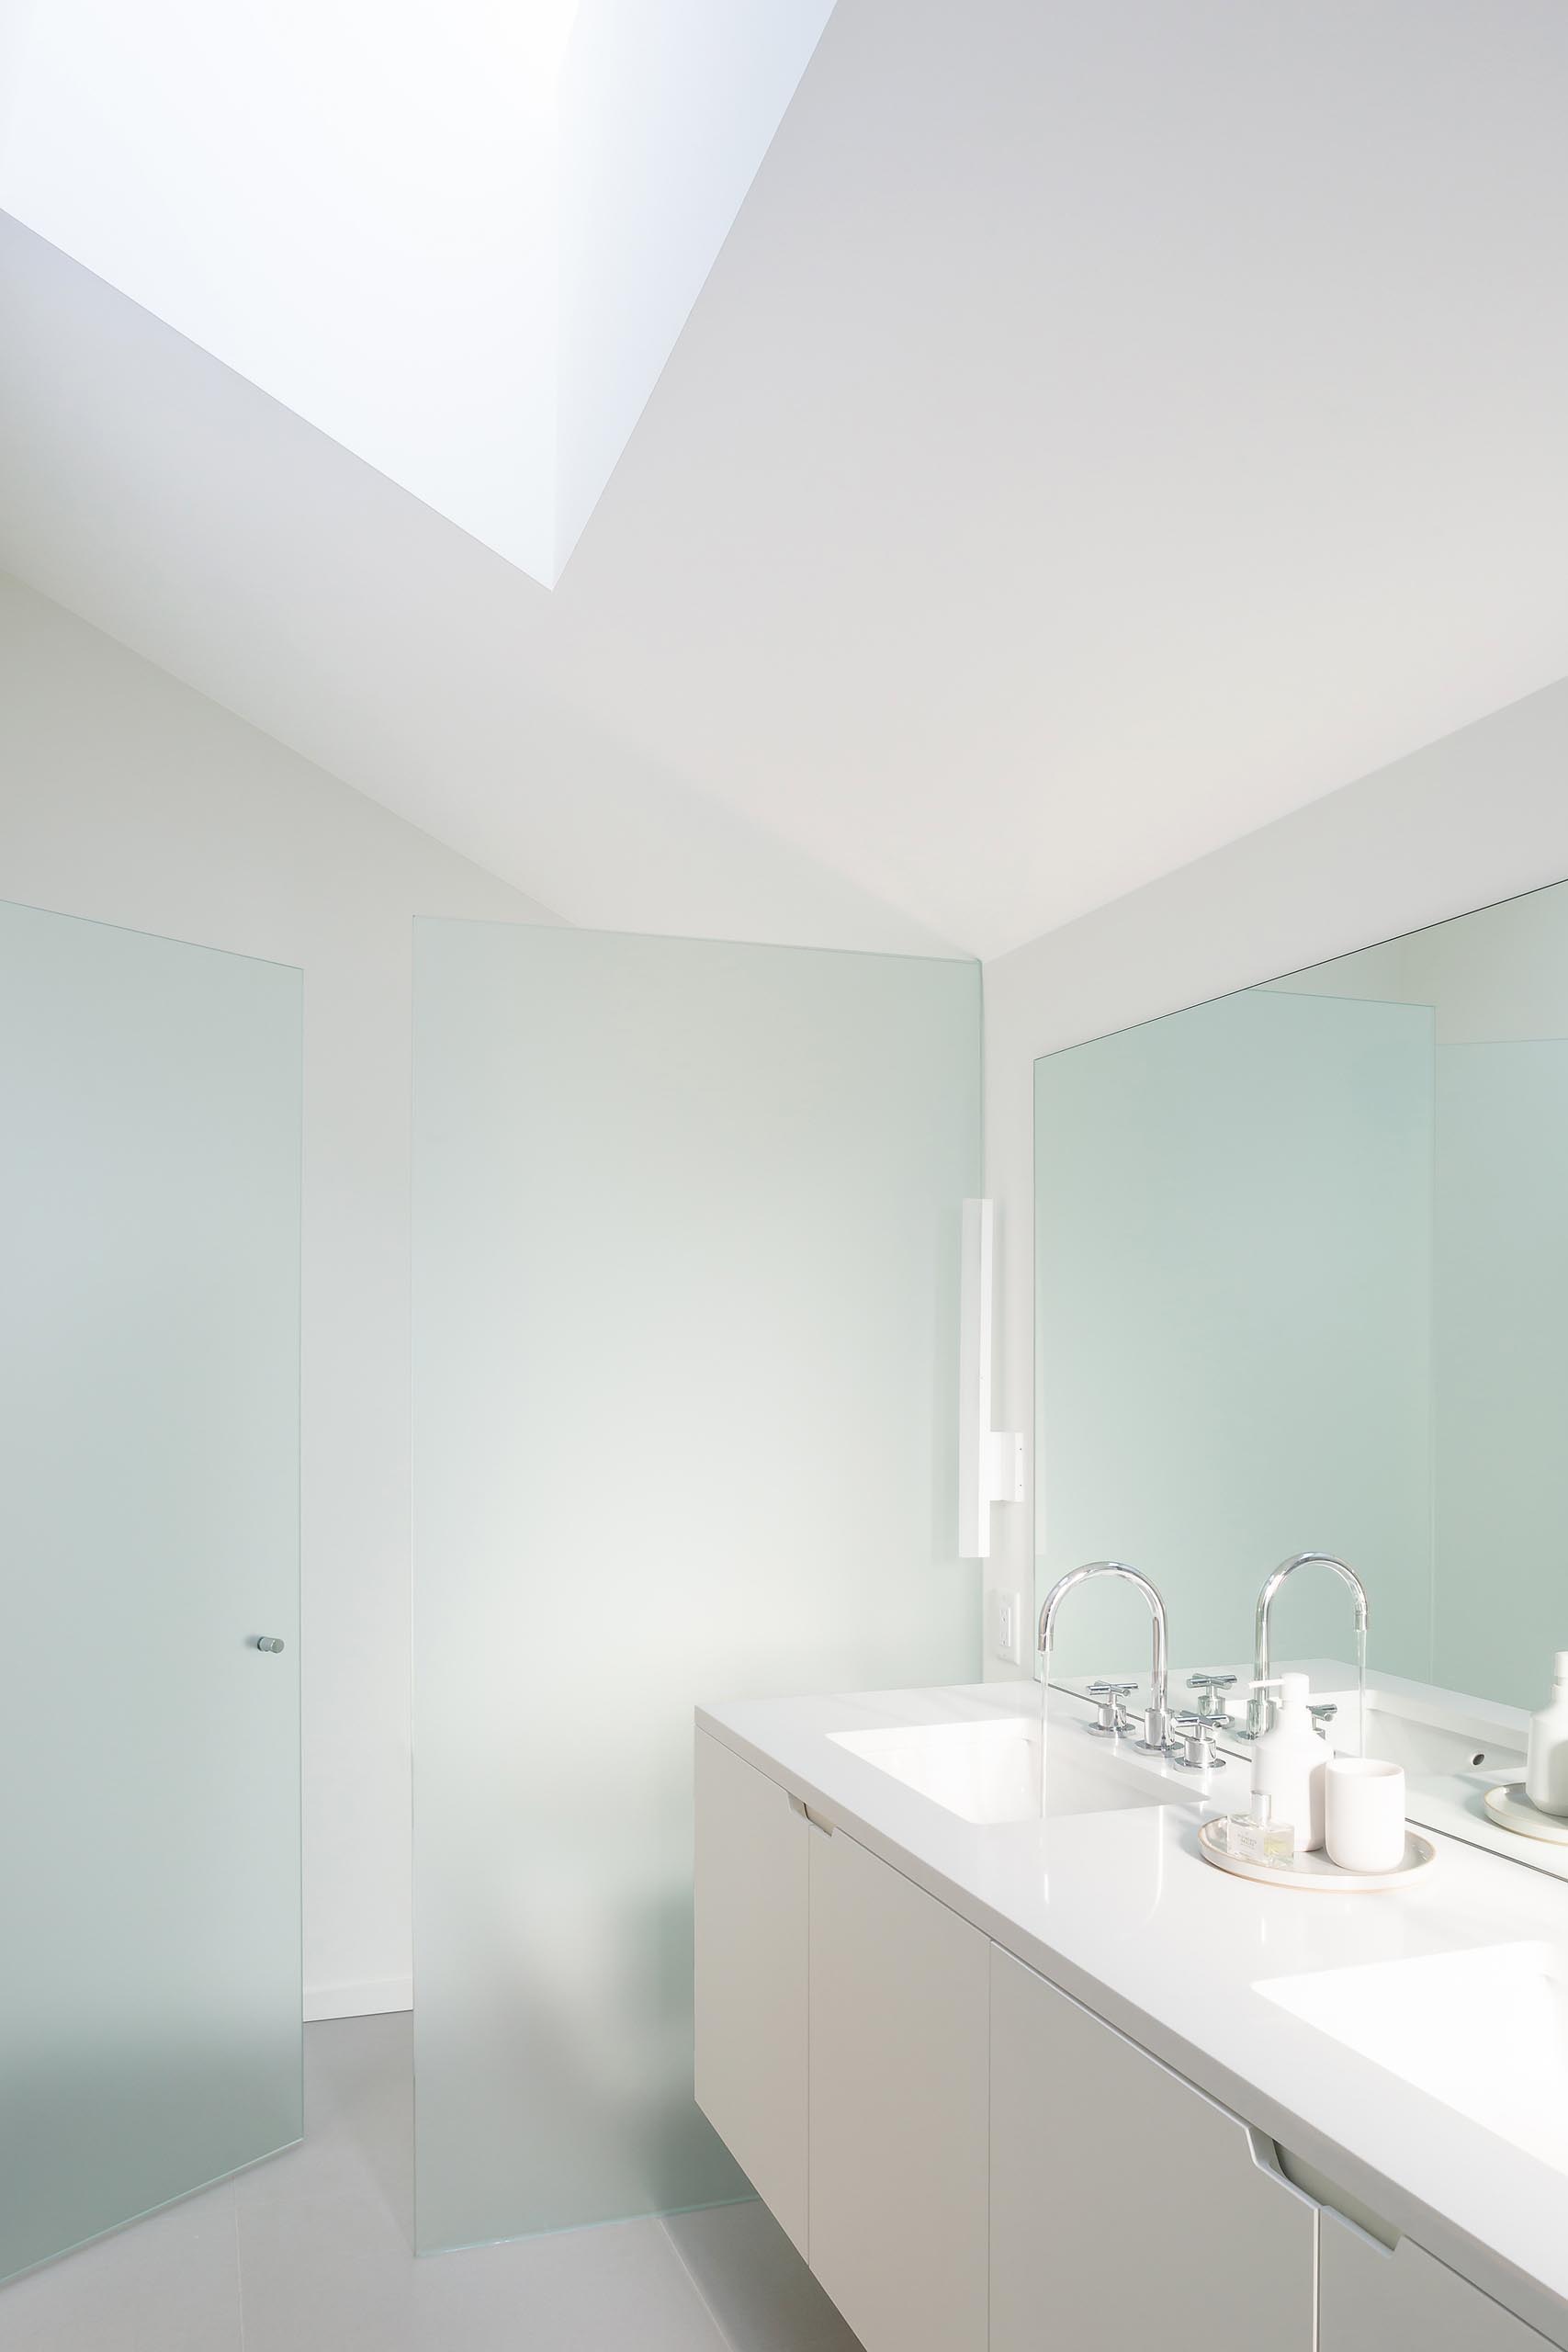 In this modern bathroom, there's a minimalist white vanity, a skylight, and a shower hidden behind frosted glass.